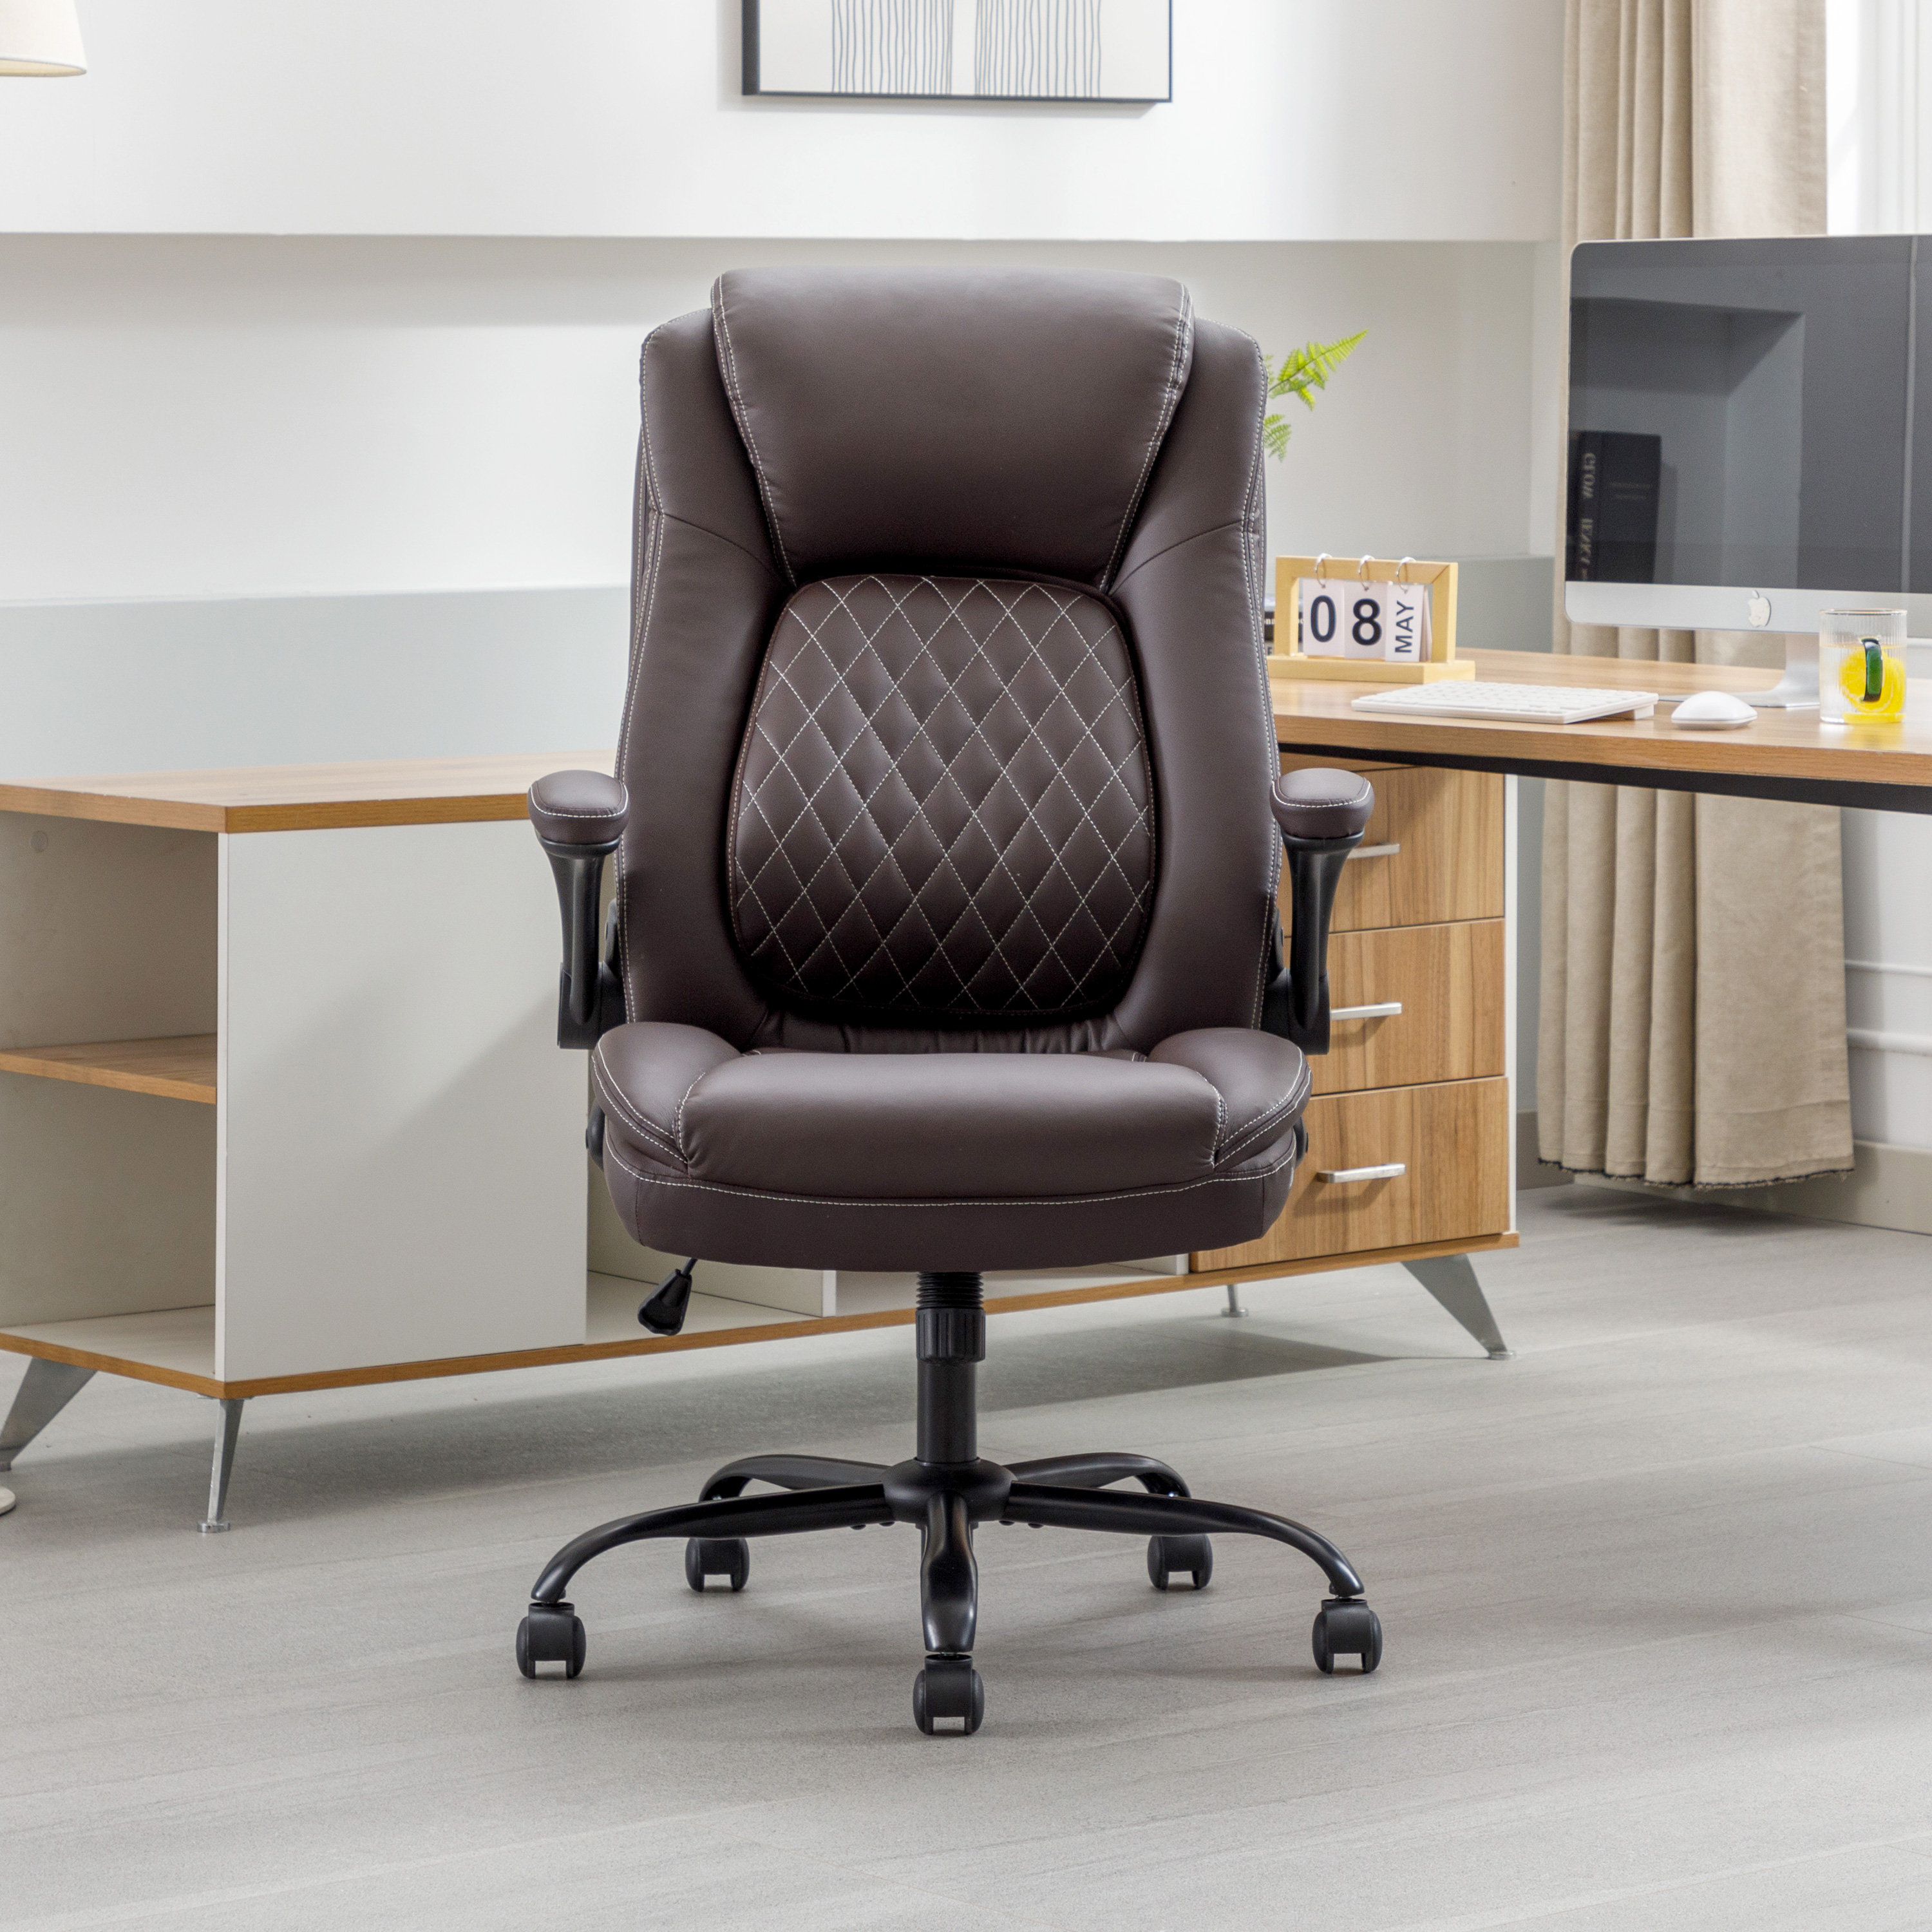 9 Best Office Chairs for Neck Pain (Feel The Difference) - Ergonomic Trends